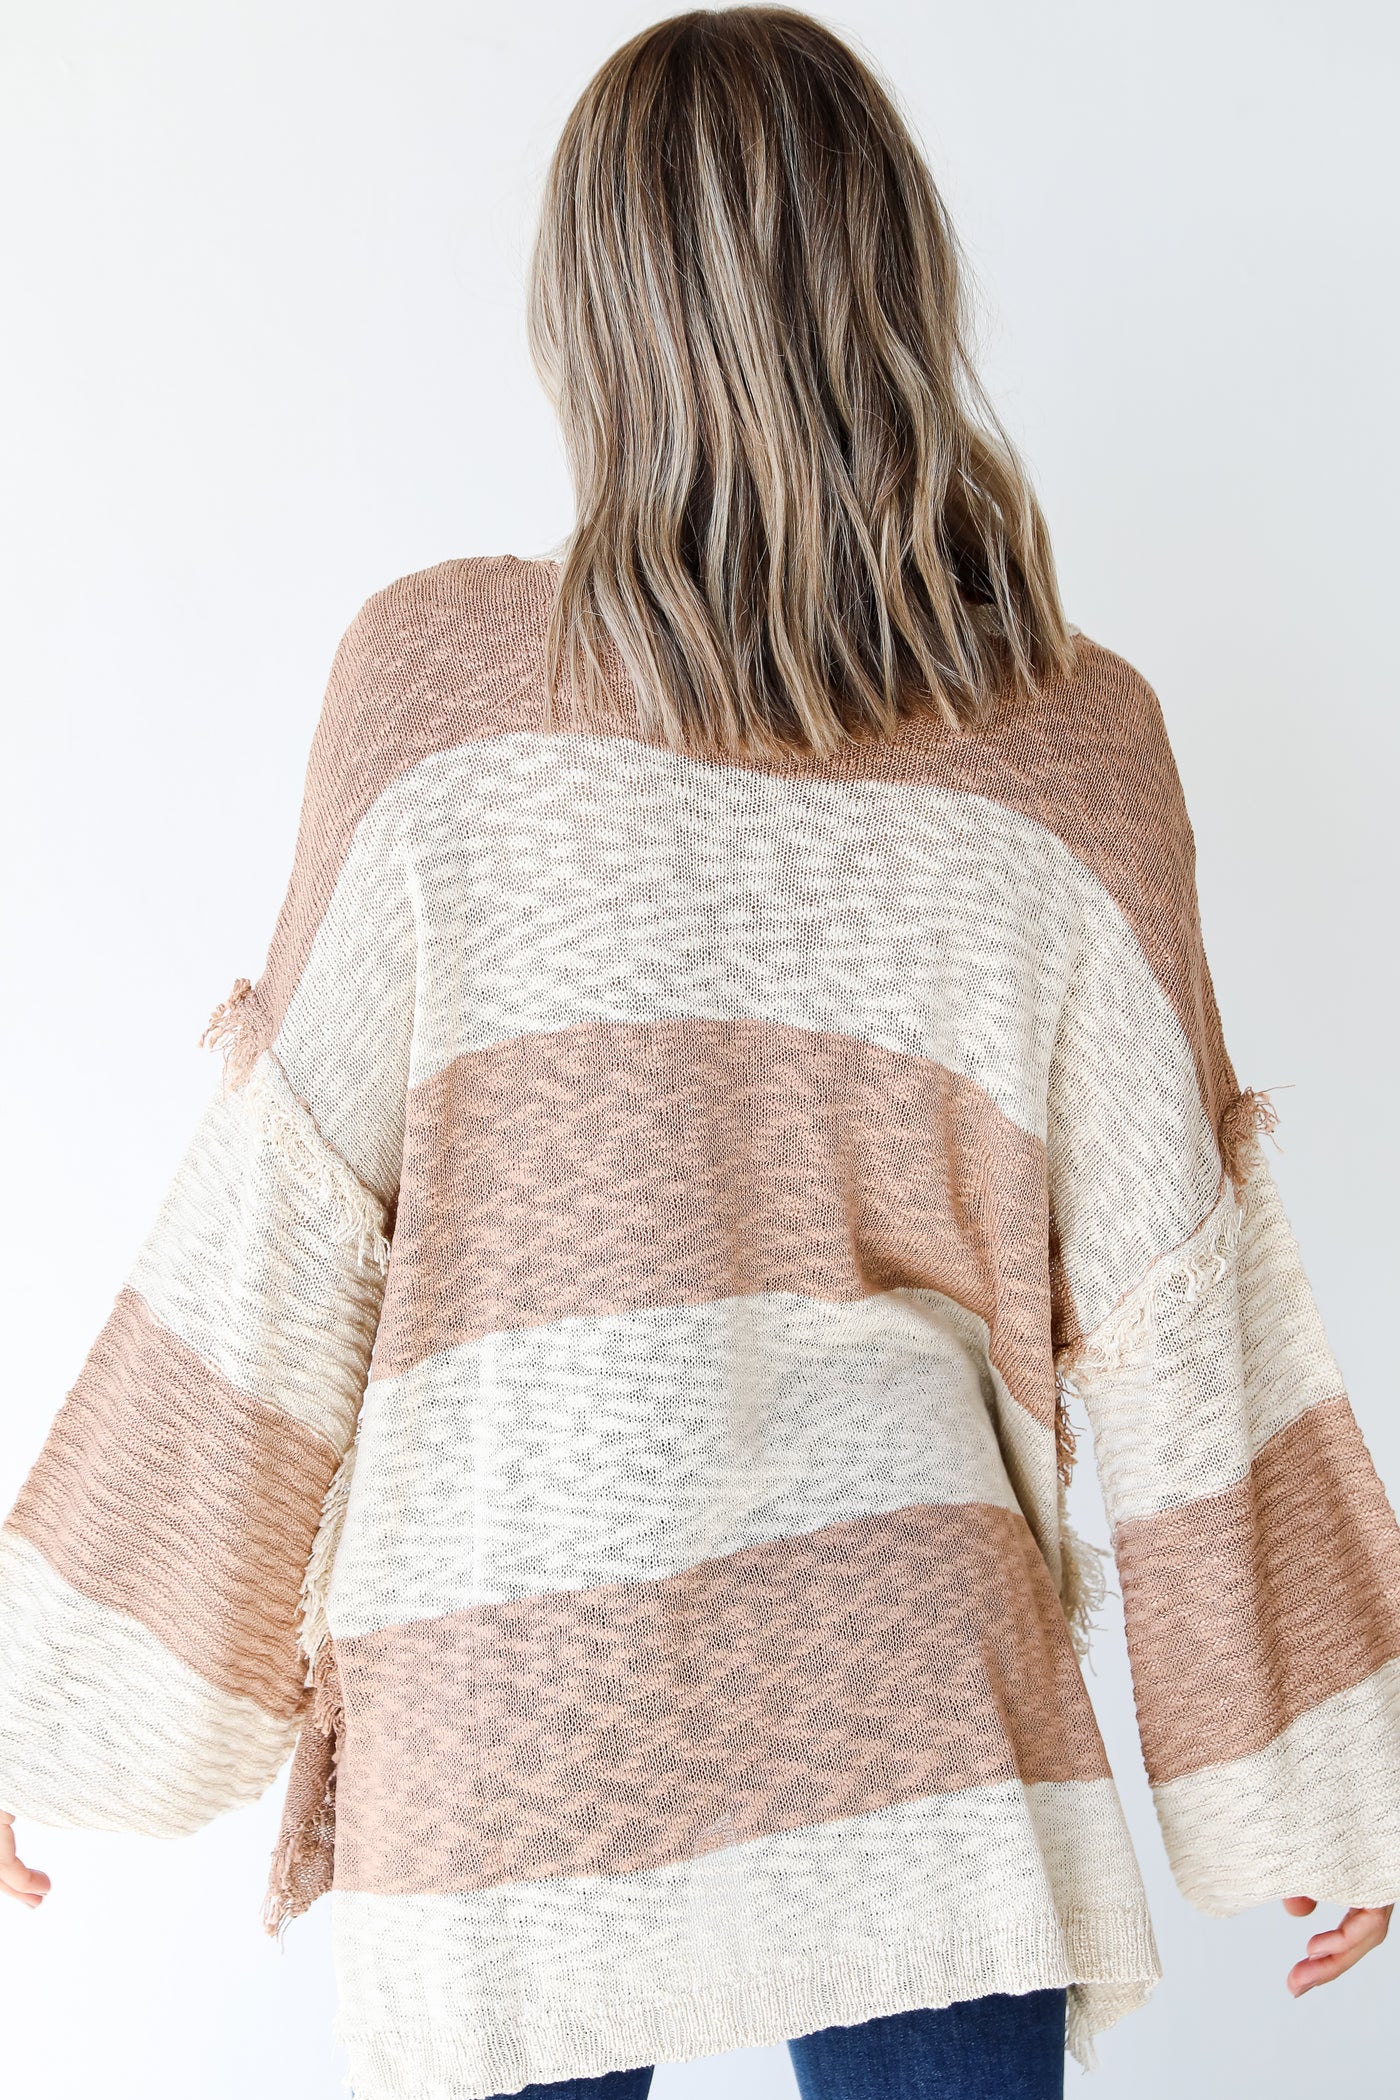 taupe sweater back view